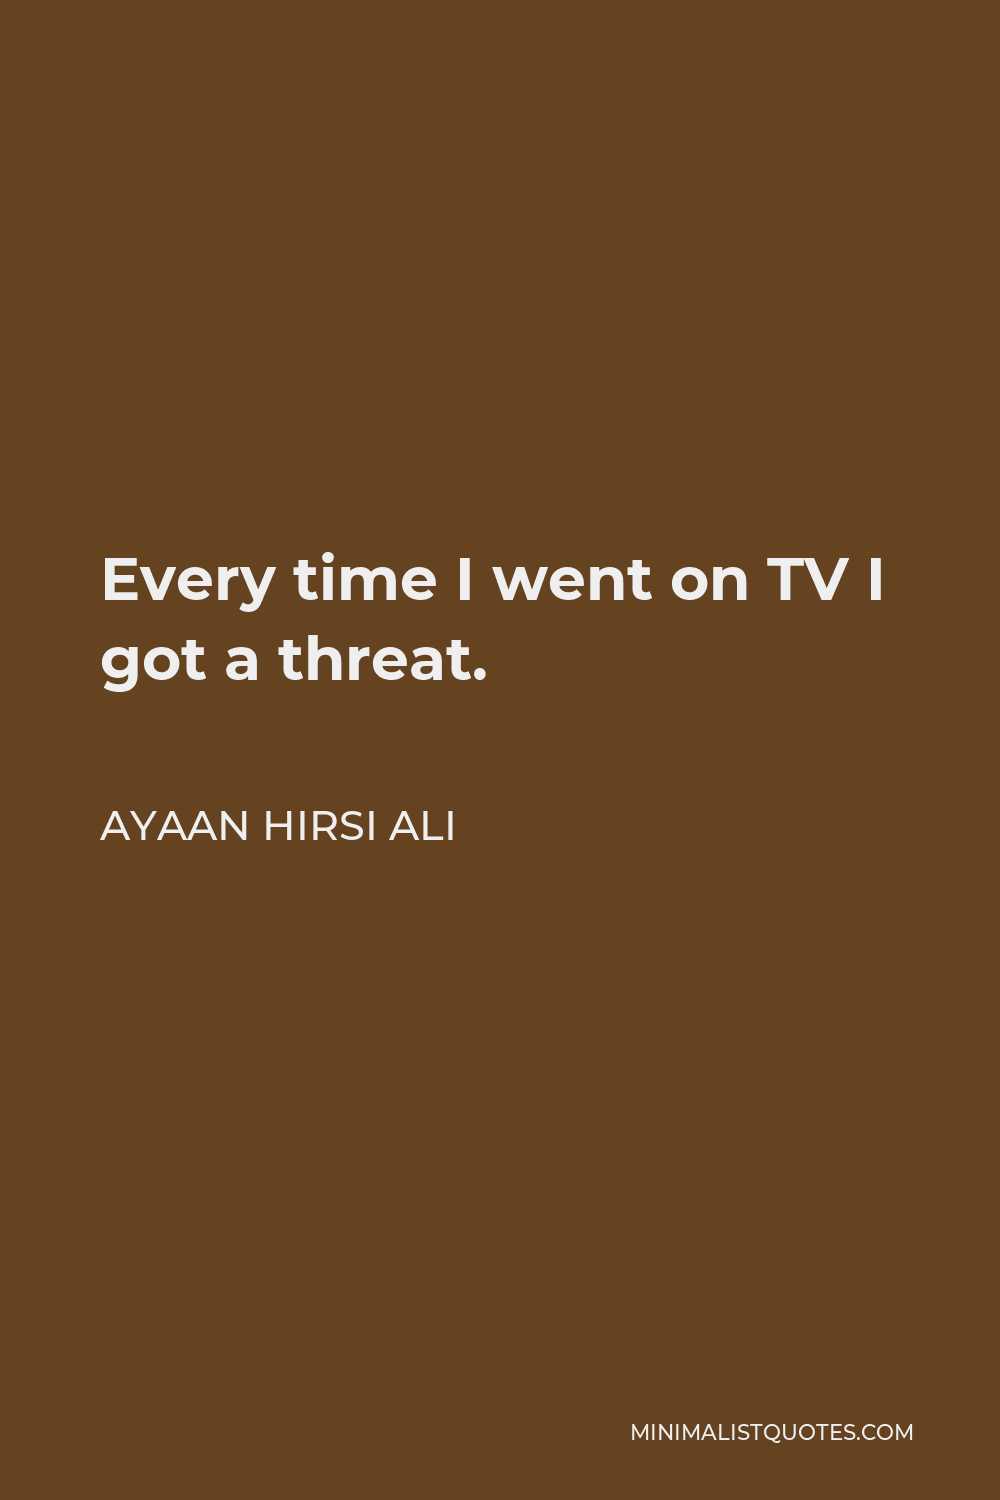 Ayaan Hirsi Ali Quote - Every time I went on TV I got a threat.